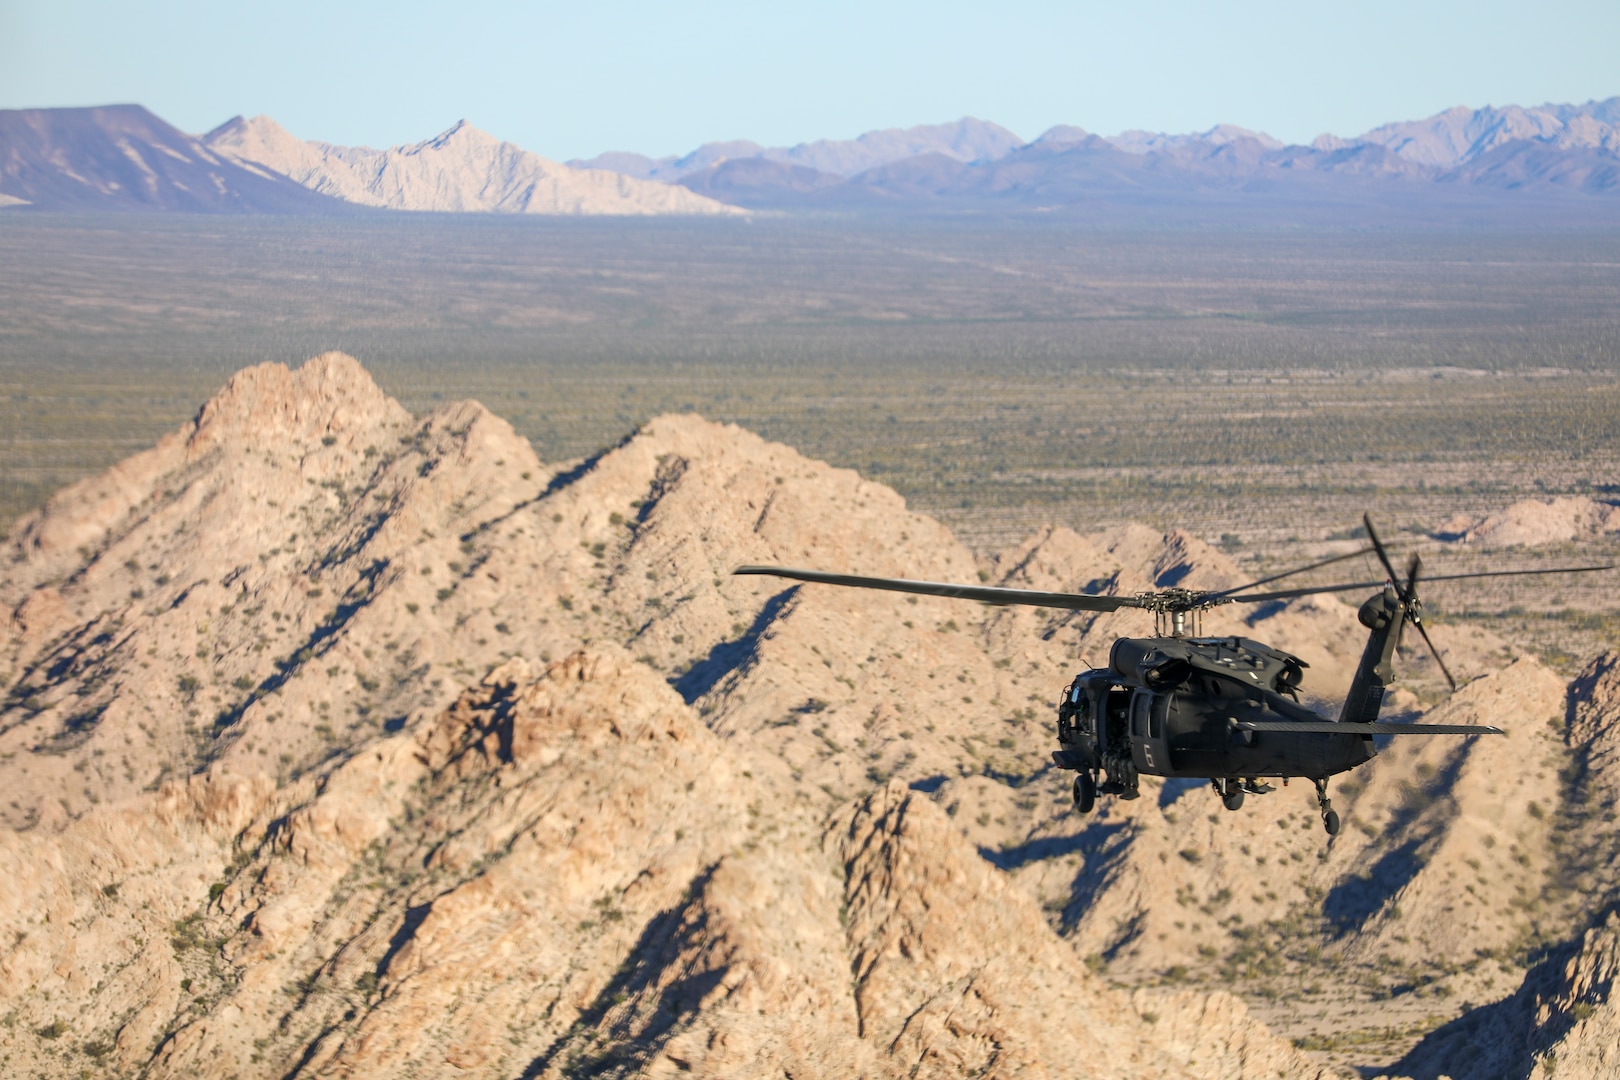 U.S. Army aviators, assigned to 207th Aviation Troop Command, transport troops via Alaska Army National Guard UH-60L Black Hawk helicopters during the Weapons and Tactics Instructor course 2-24 near Marine Corps Air Station Yuma, Ariz., April 3, 2024. During the seven-week course, two Army Black Hawk aircrews flew an intensive schedule of simulated combat missions with U.S., allied and opposing force fixed wing and rotary aircraft.